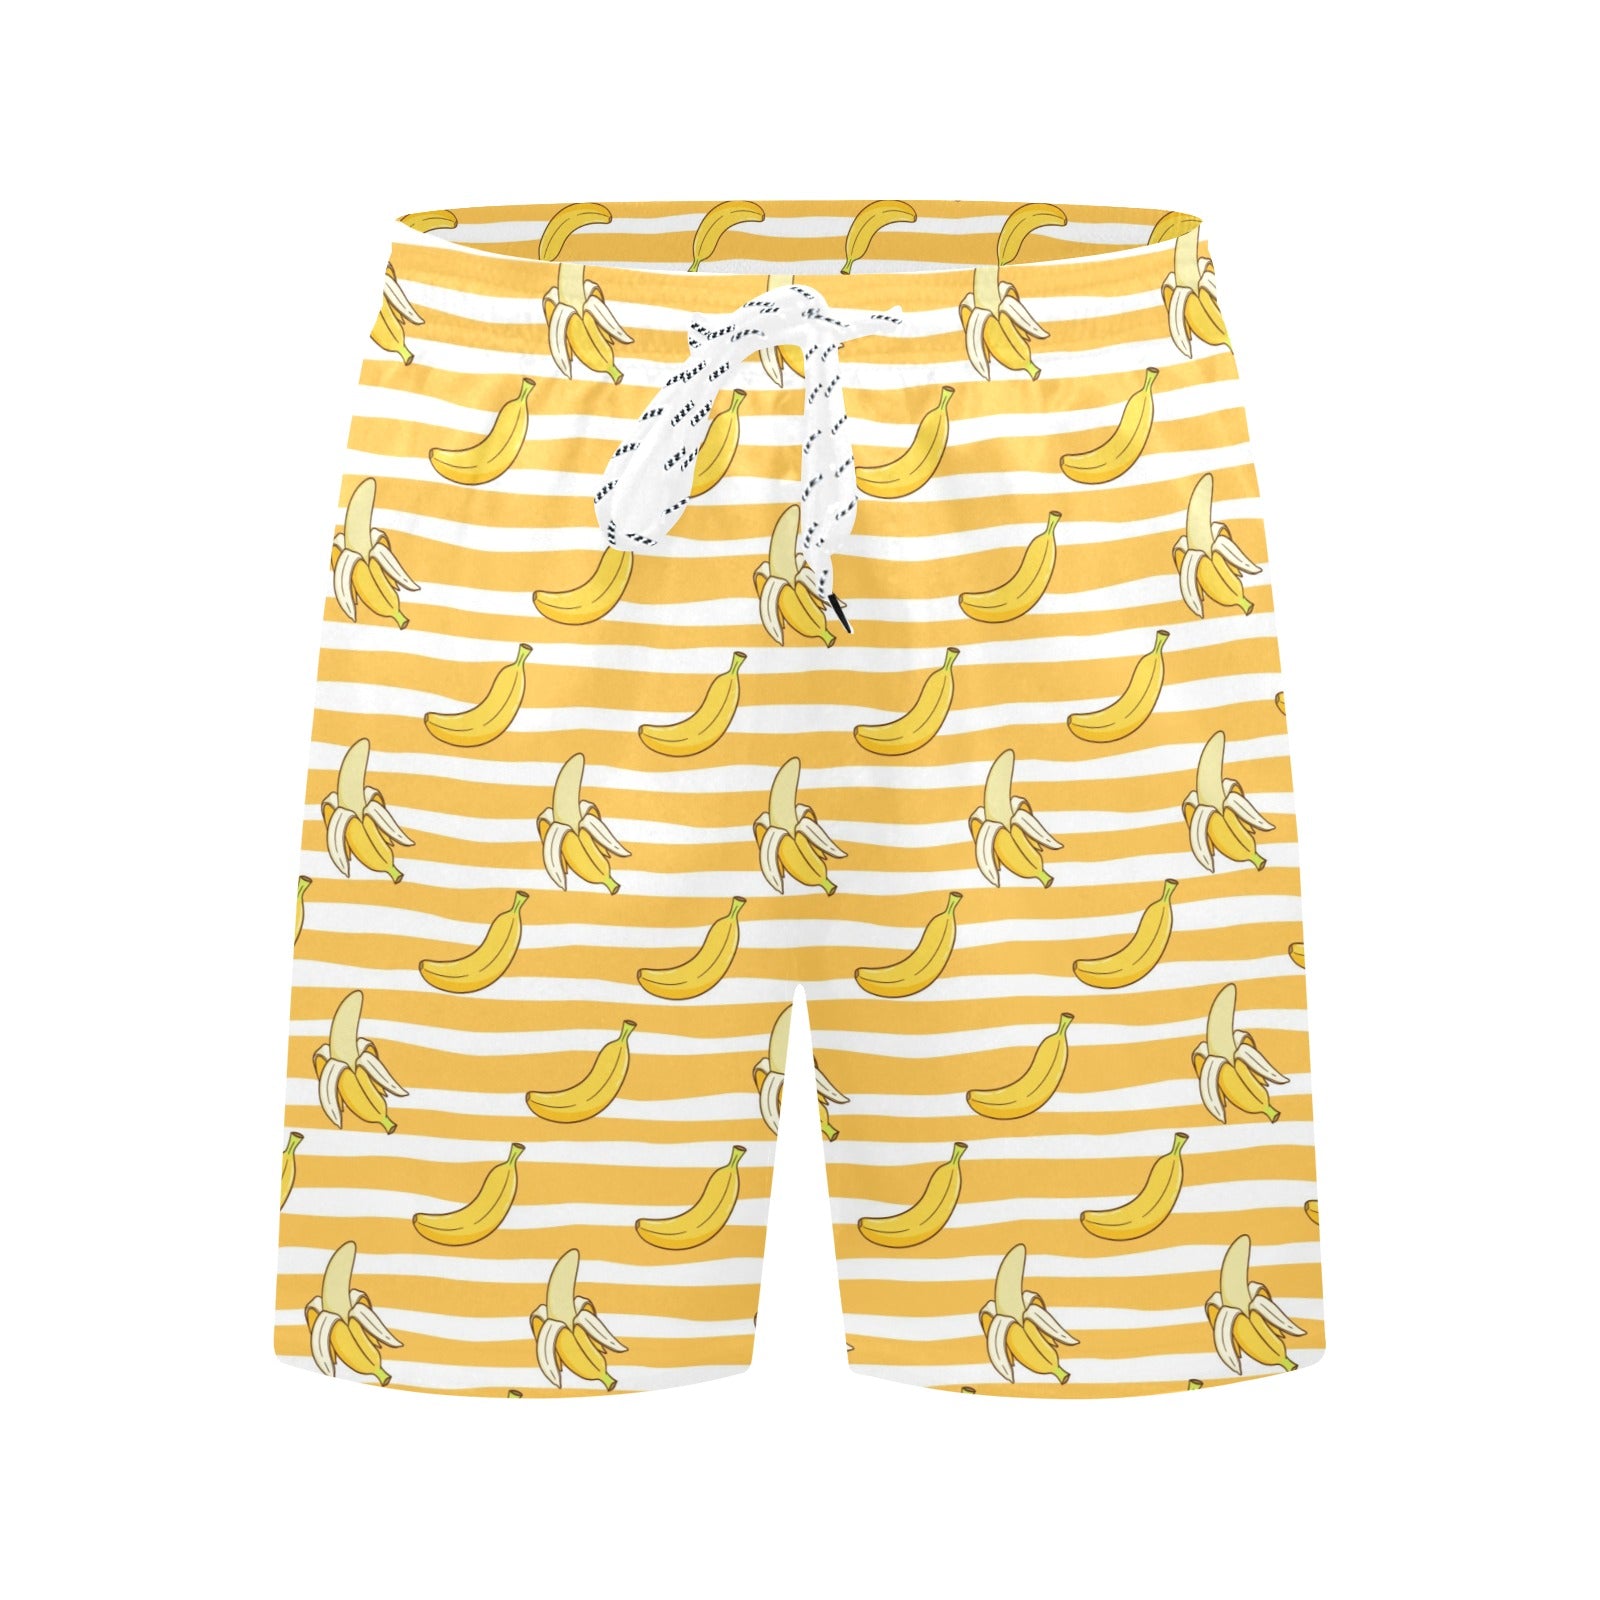 Banana Men Mid Length Shorts, Striped Yellow Funny Beach Swim Trunks Front and Back Pockets Mesh Drawstring Boys Casual Bathing Suit Summer Starcove Fashion